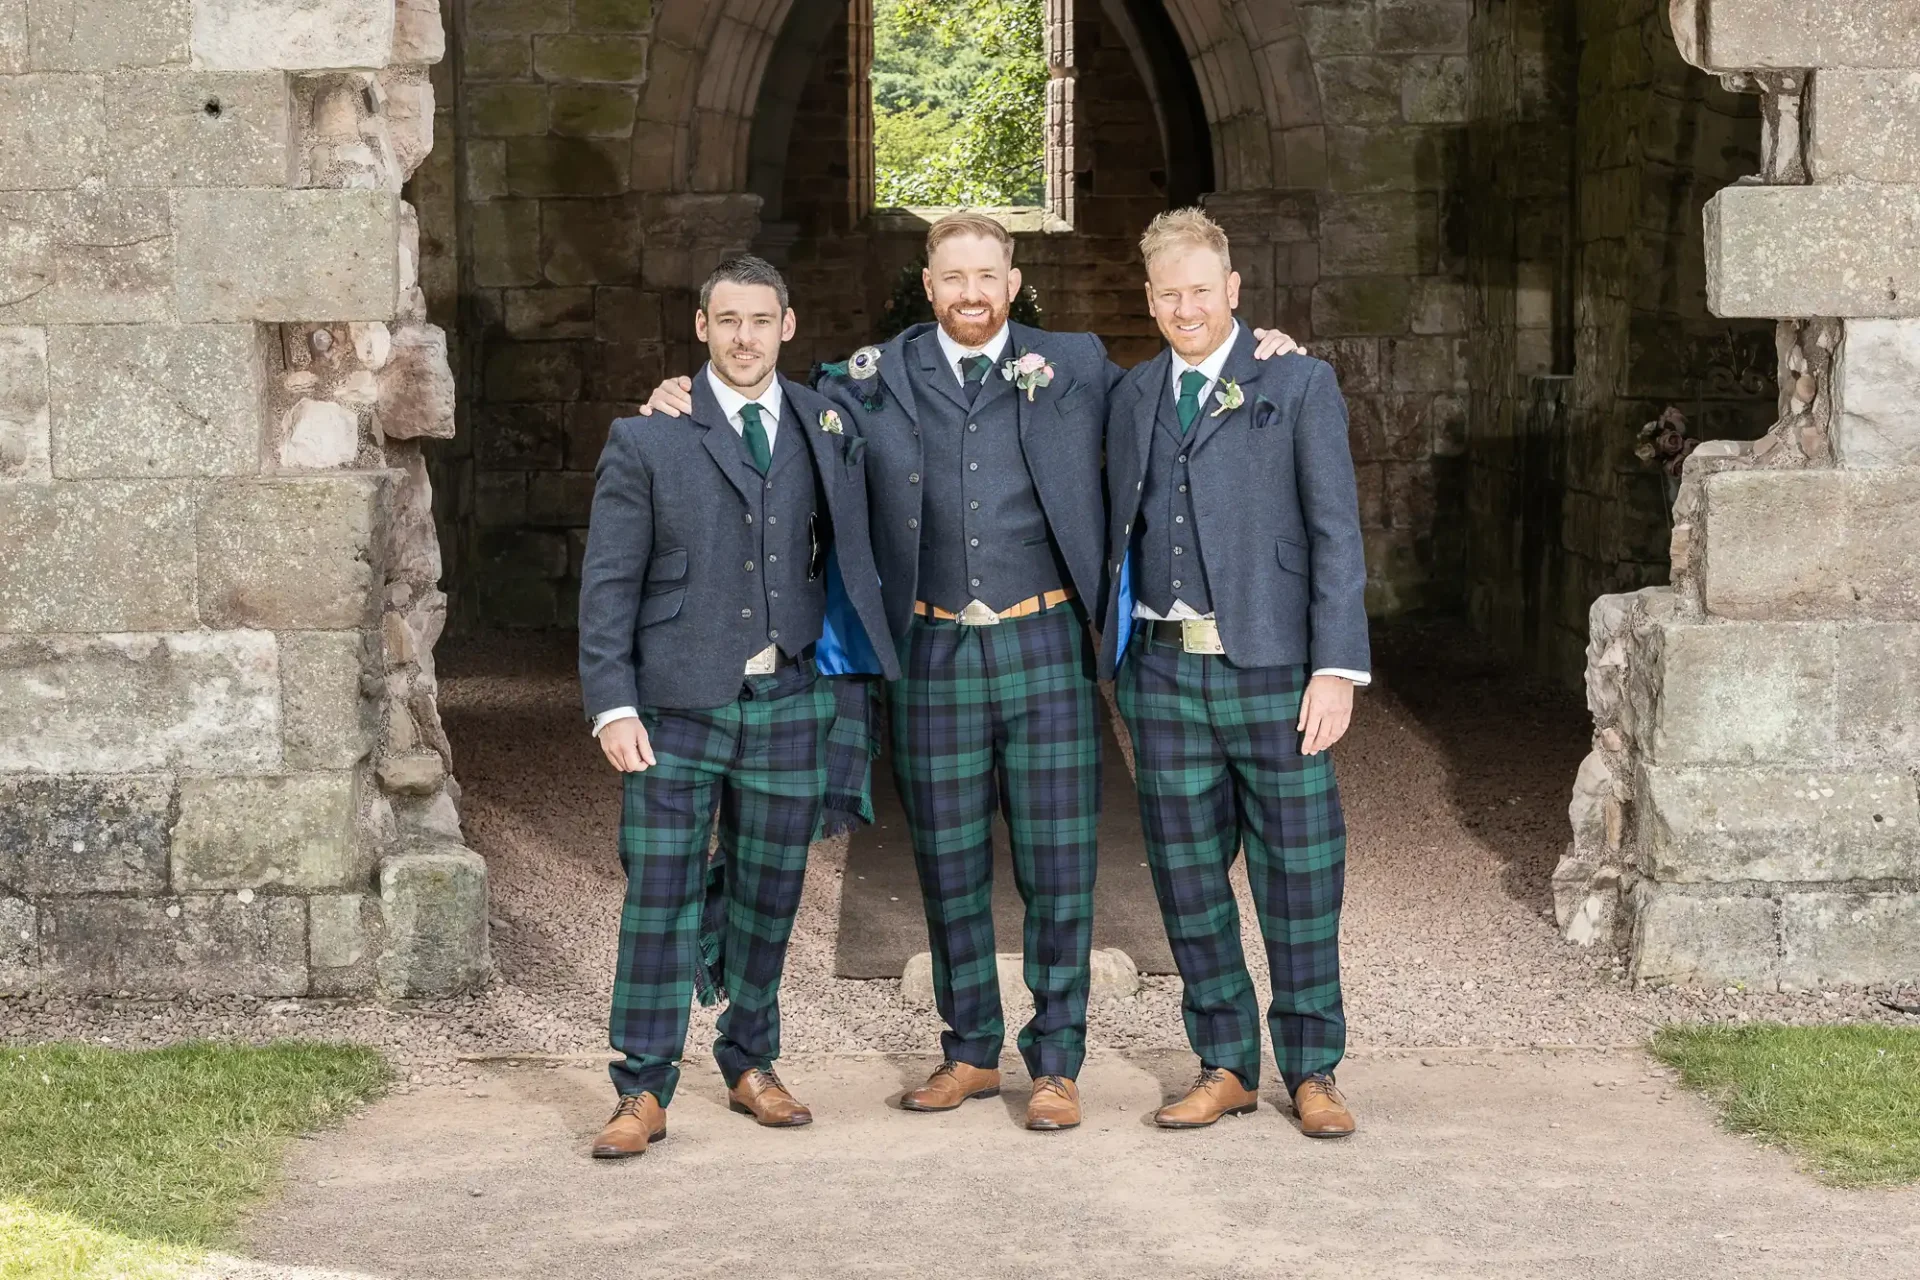 Three men in tartan kilts and tweed jackets posing with arms around each other's shoulders in front of an old stone archway.